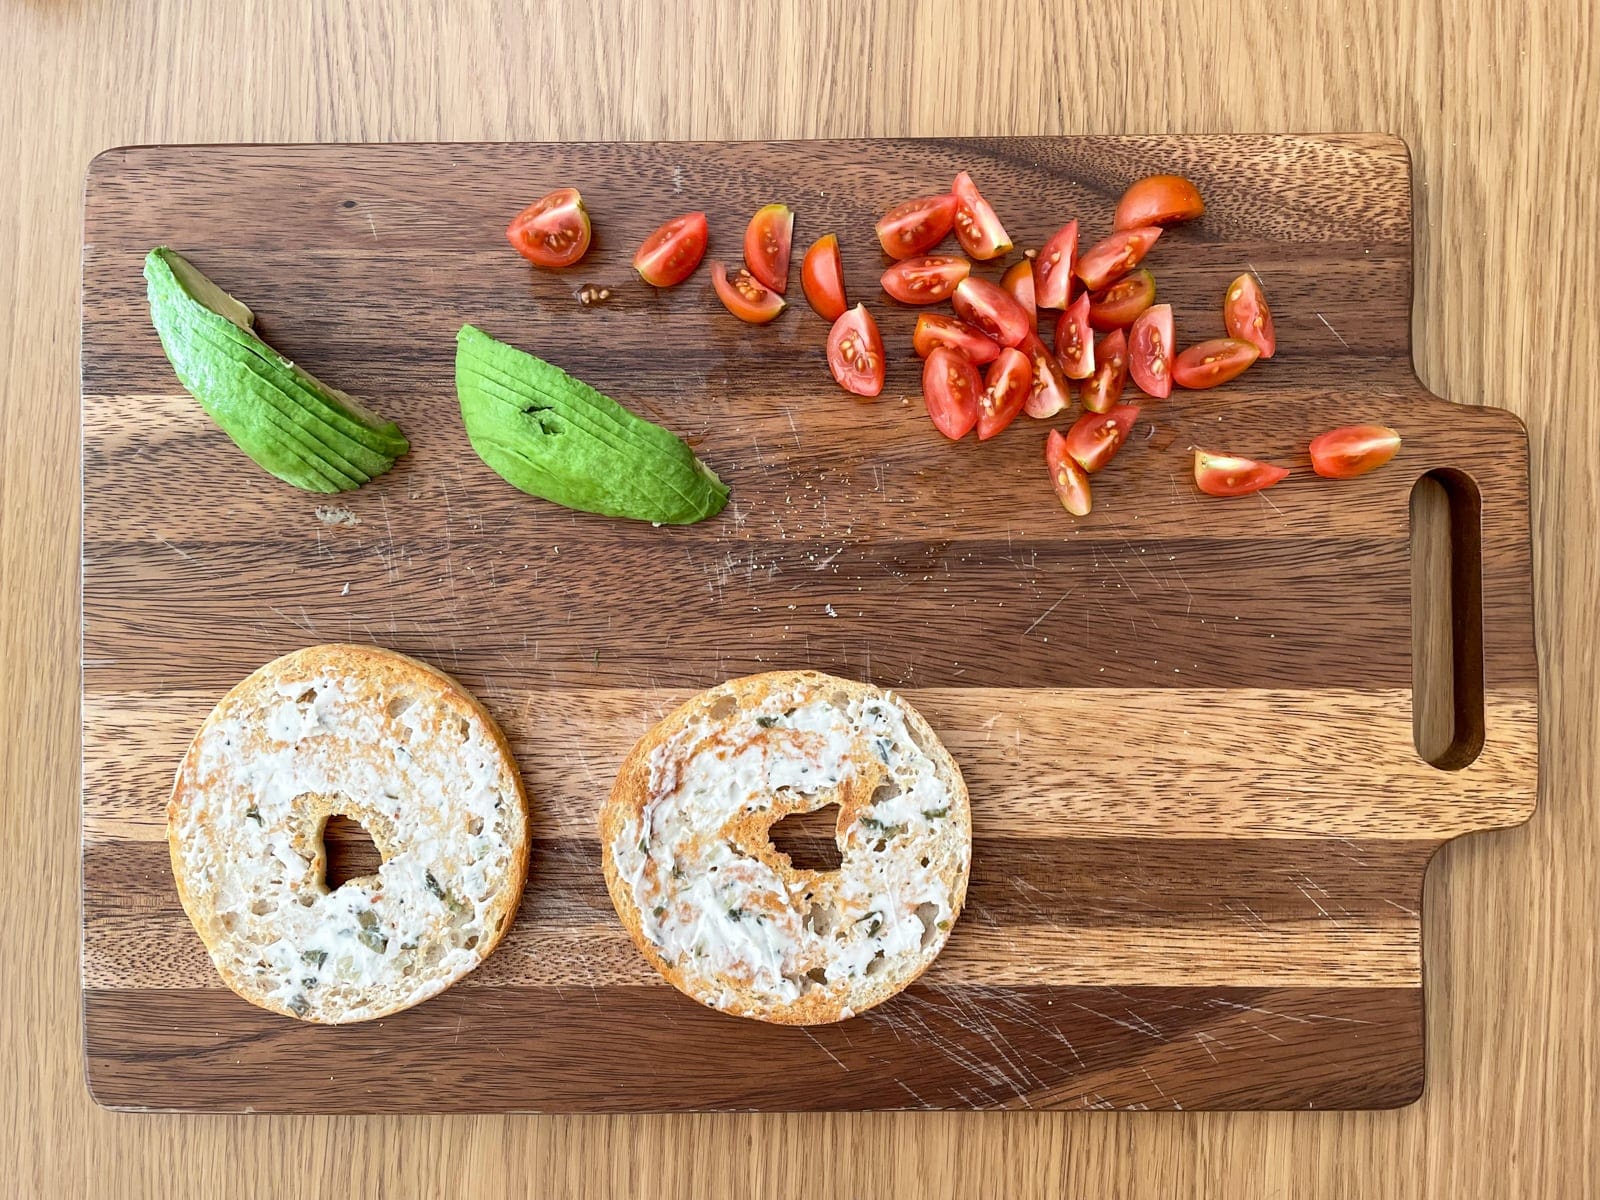 A wooden chopping board laid out with sliced cherry tomatoes and sliced avocado, and an open bagel with cream cheese spread